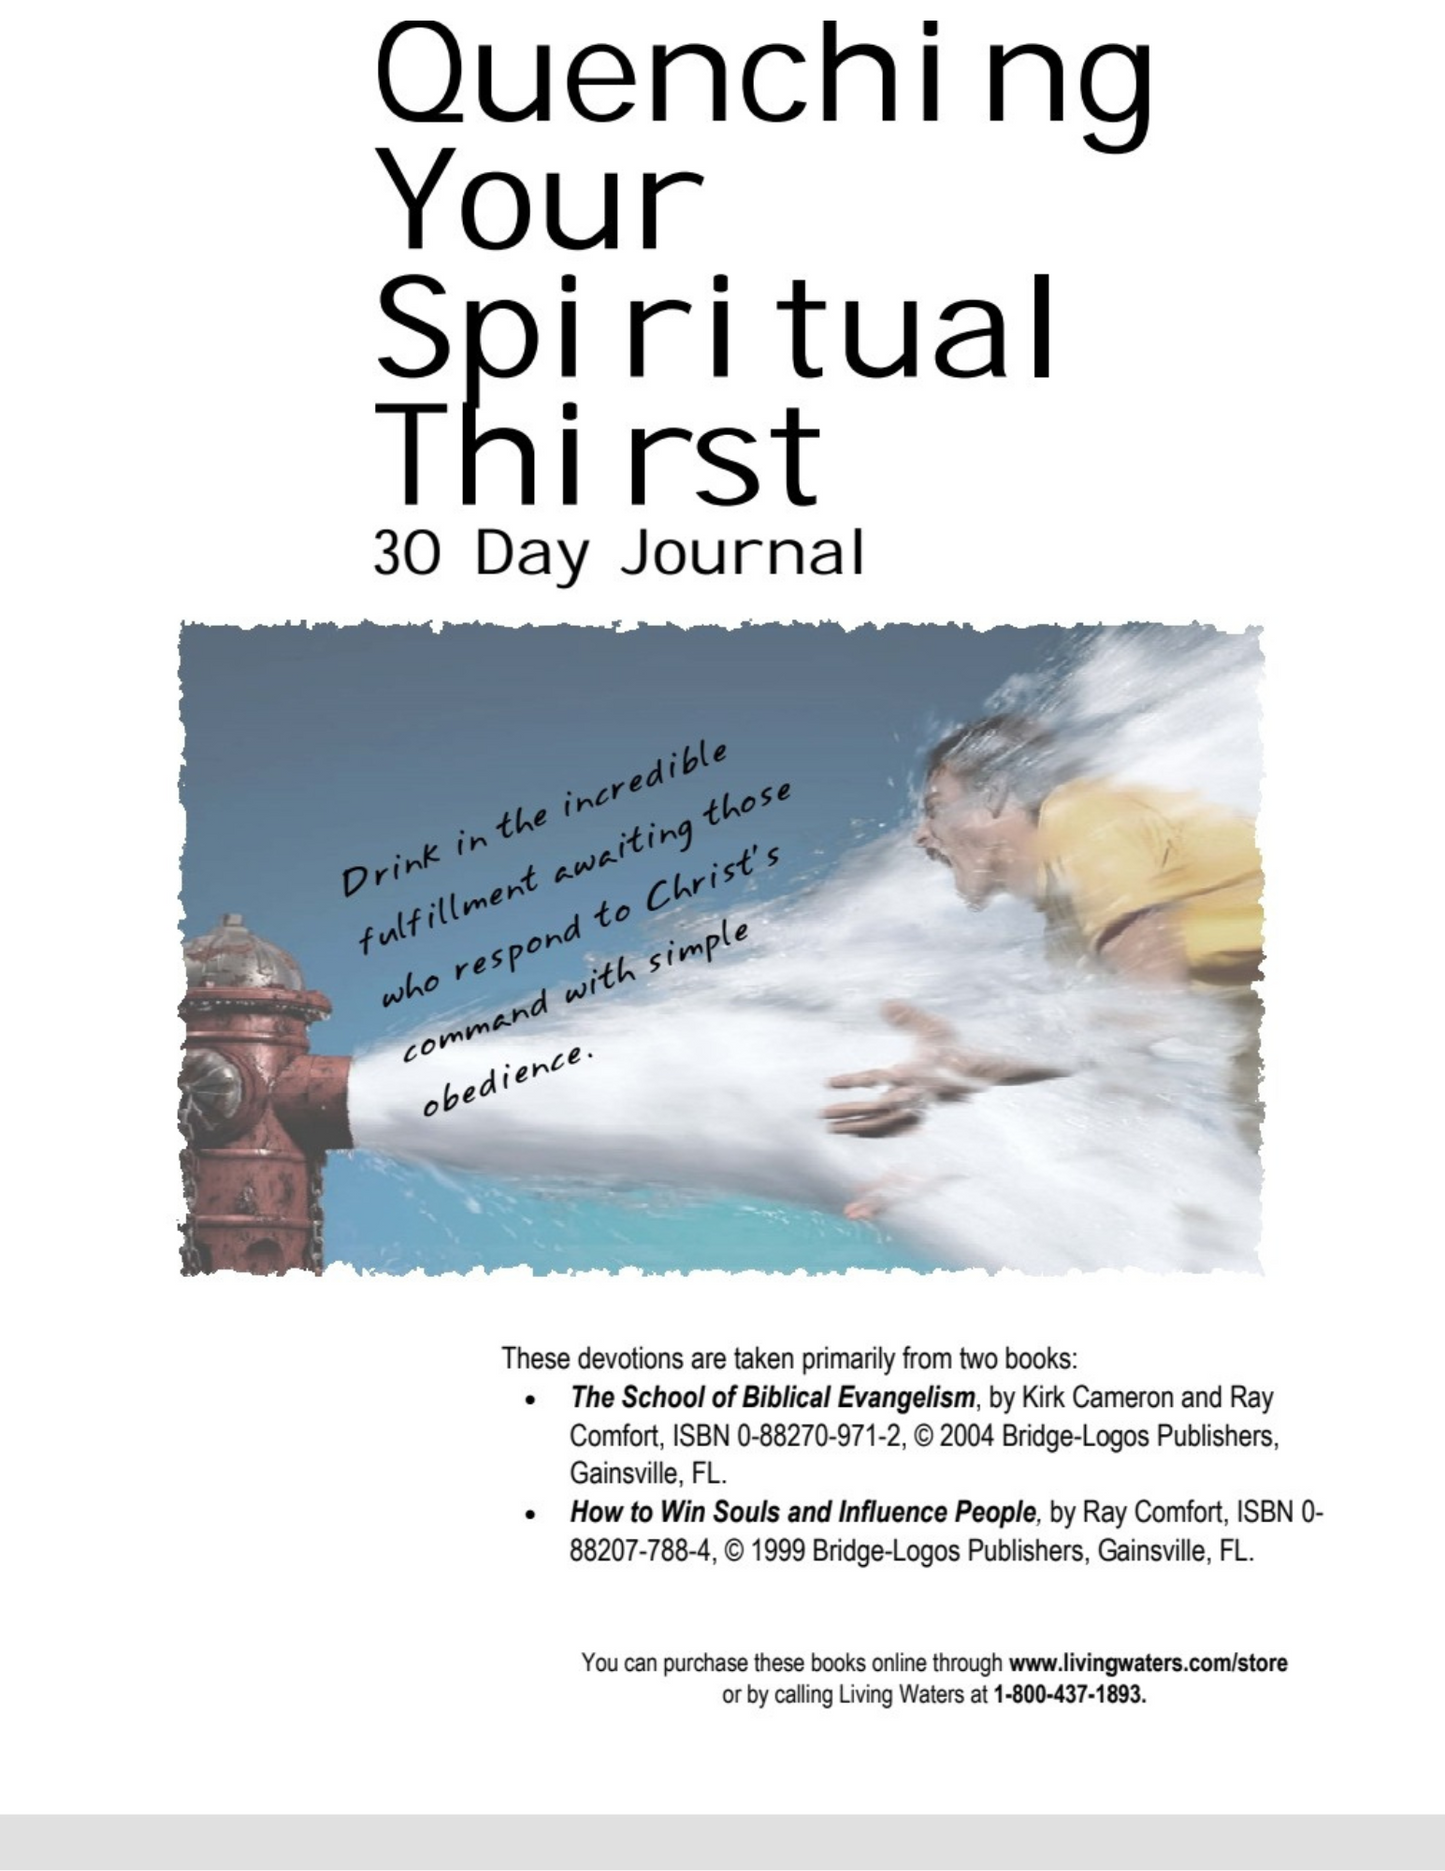 Quenching Your Spiritual Thirst (30 Day Journal)